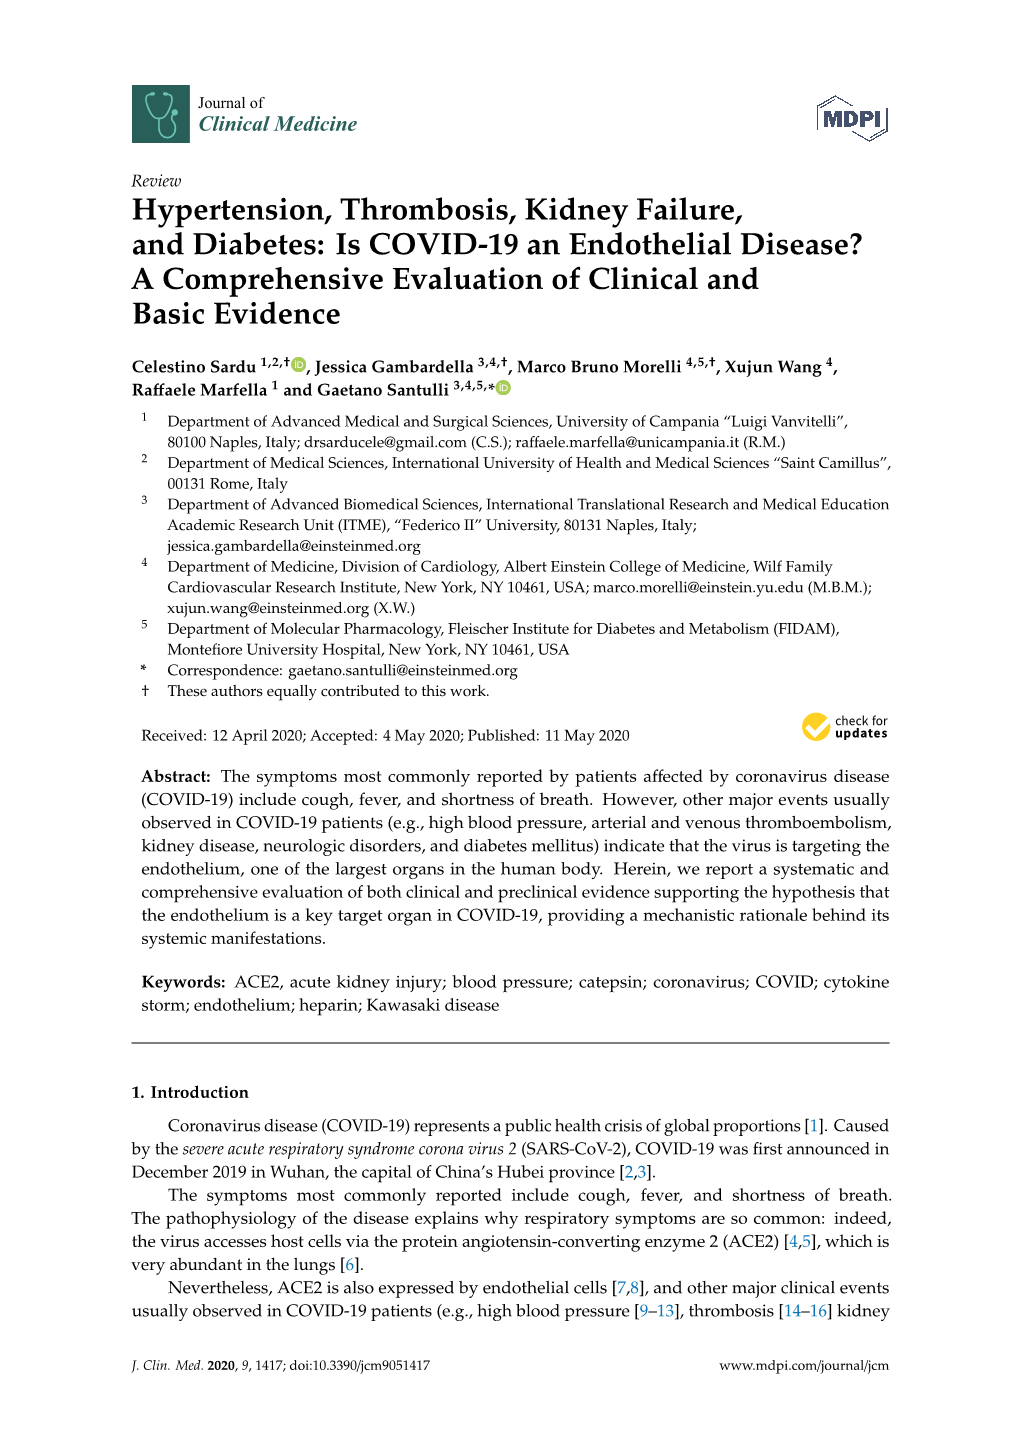 Is COVID-19 an Endothelial Disease? a Comprehensive Evaluation of Clinical and Basic Evidence